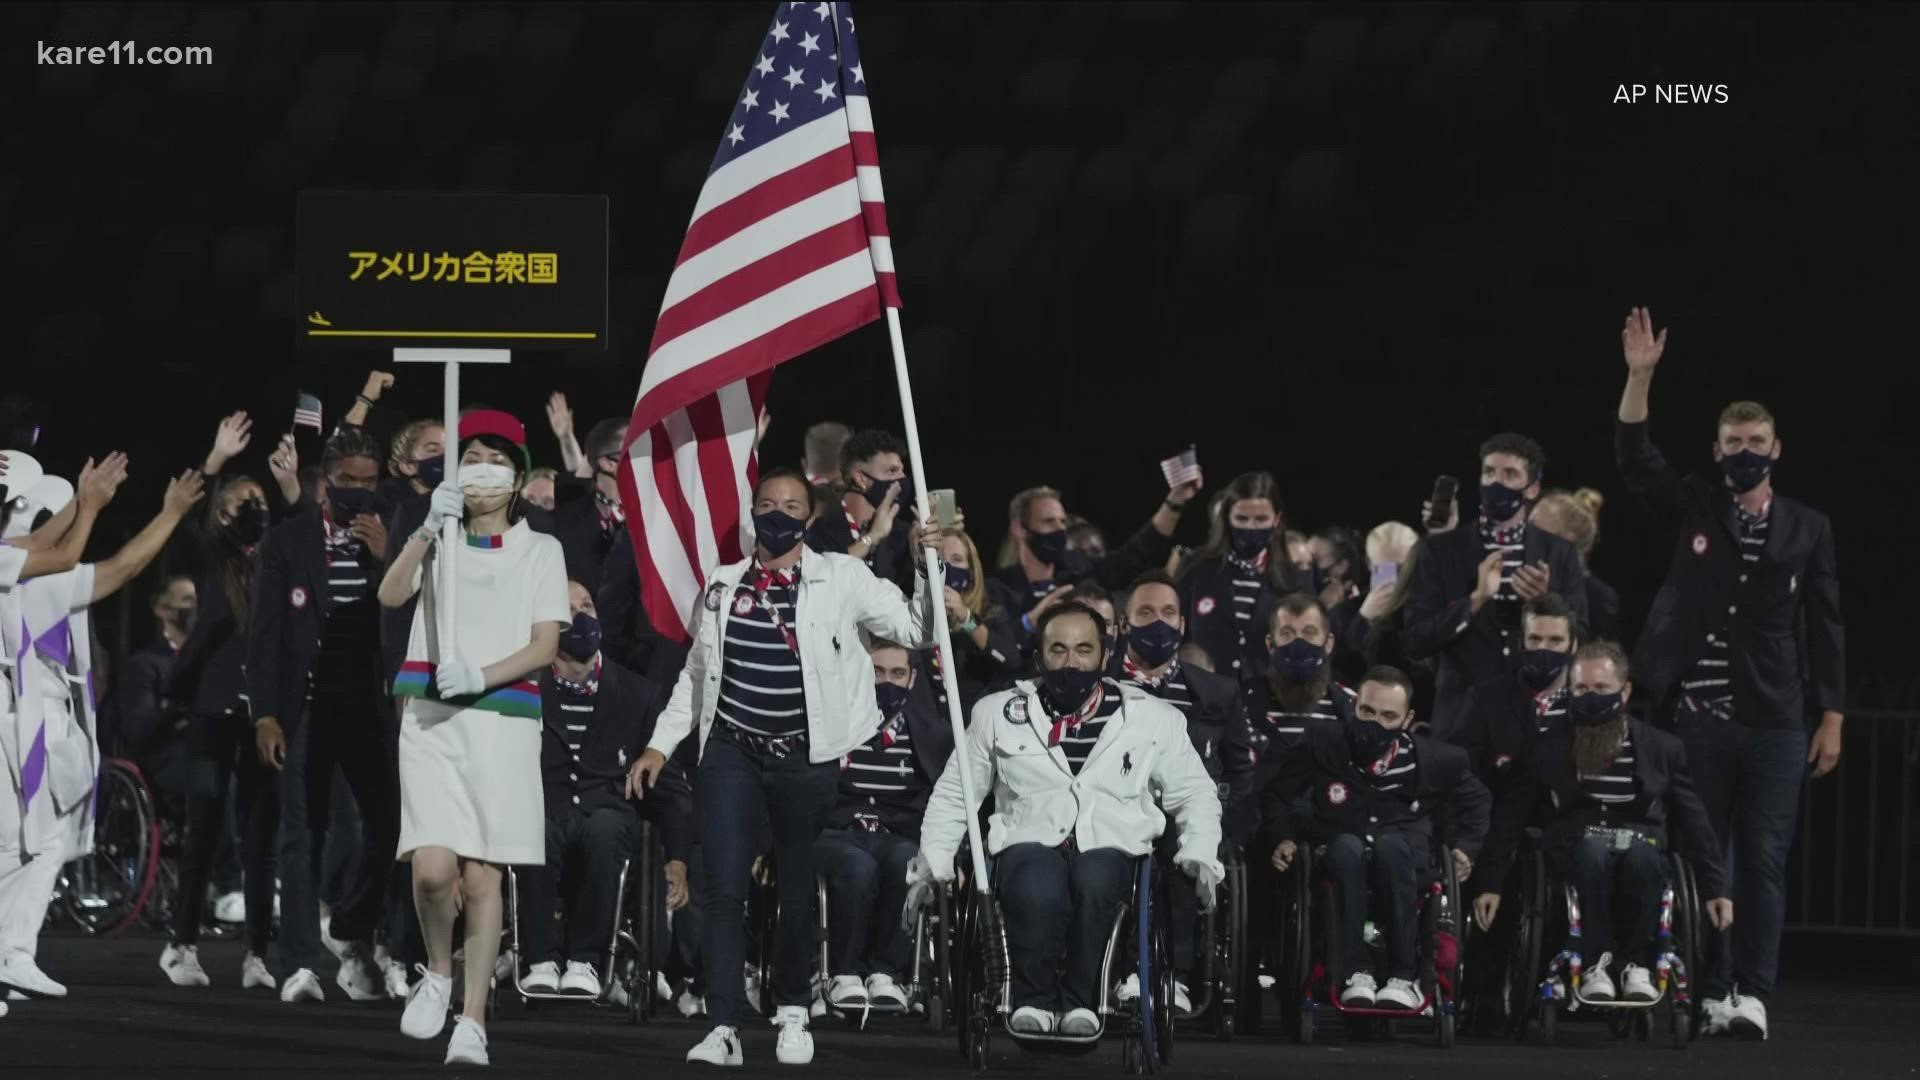 Two Minnesotans led Team USA into the Opening Ceremony of the Paralympics, and they're just getting started.